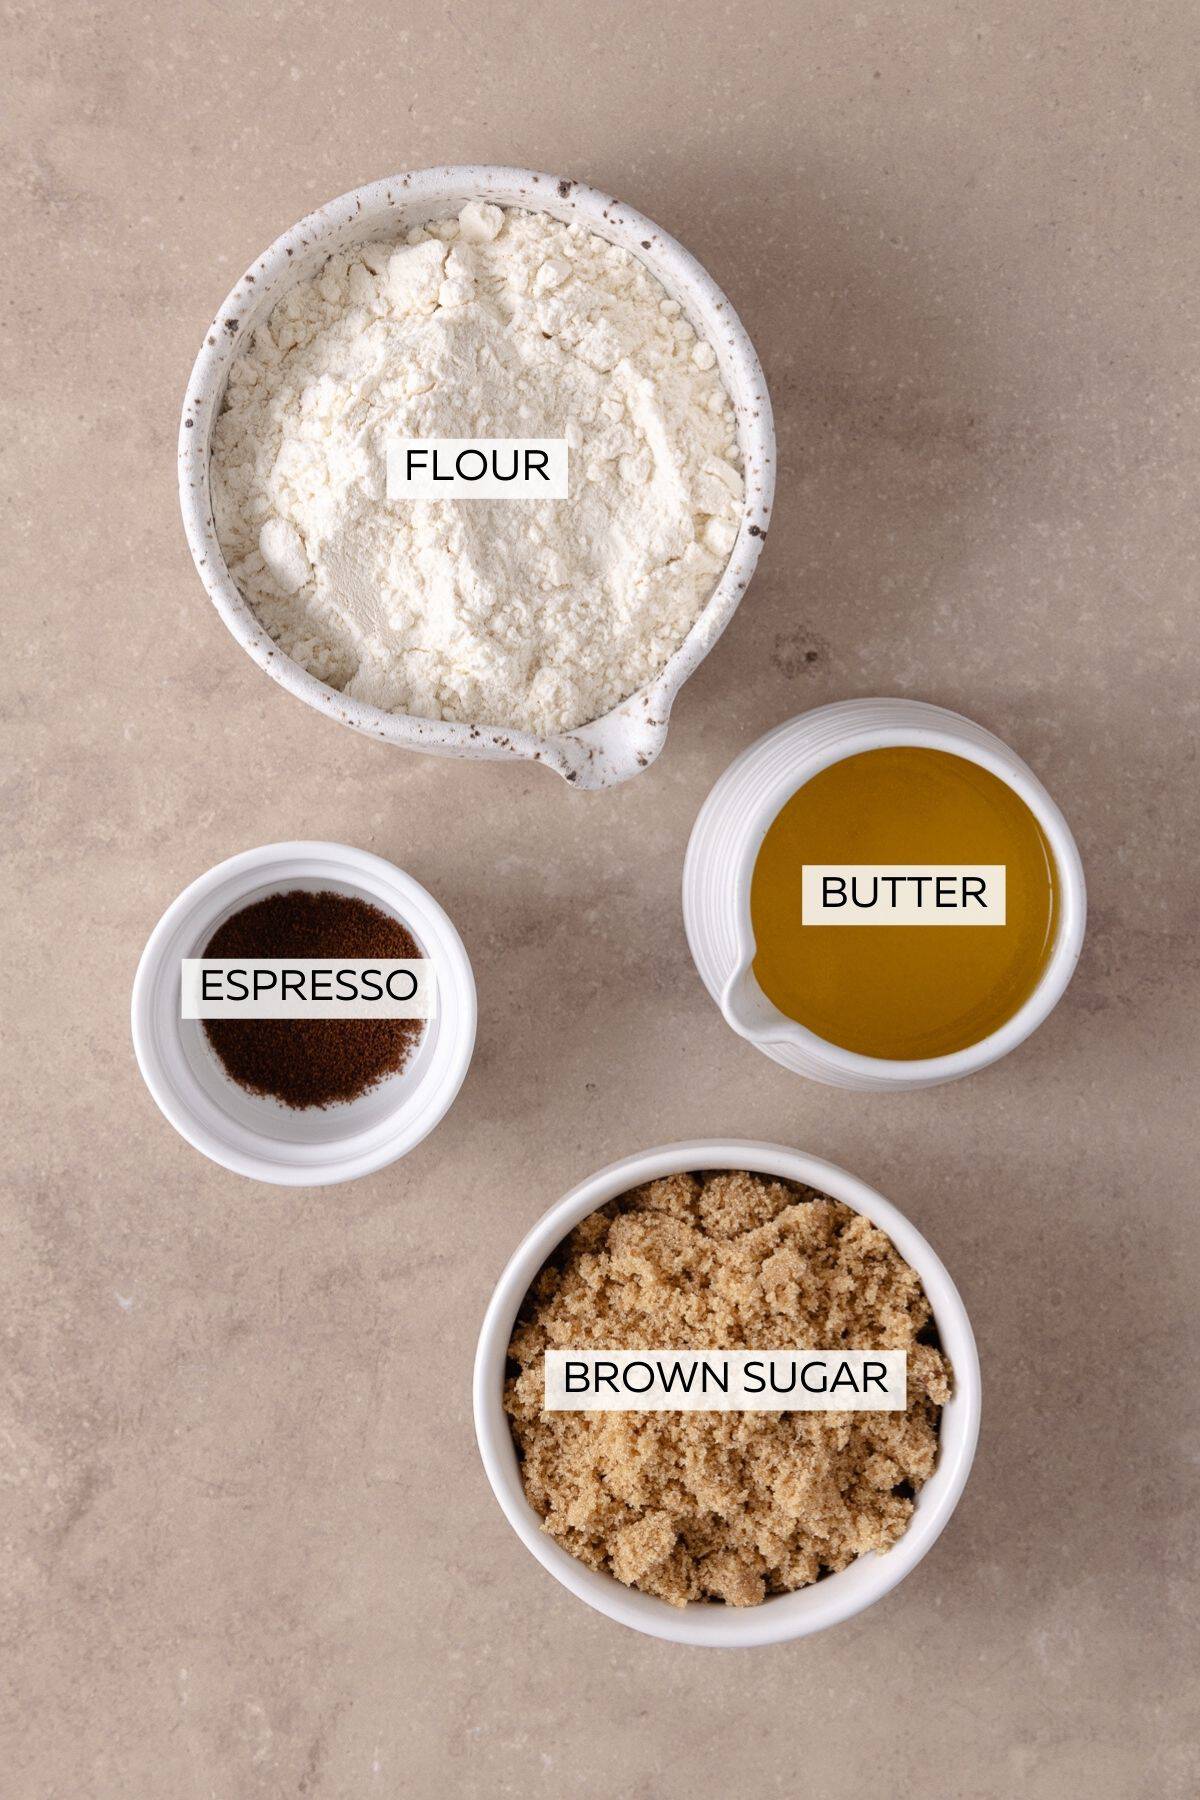 Crumb topping ingredients - Flour, brown sugar, butter and espresso.